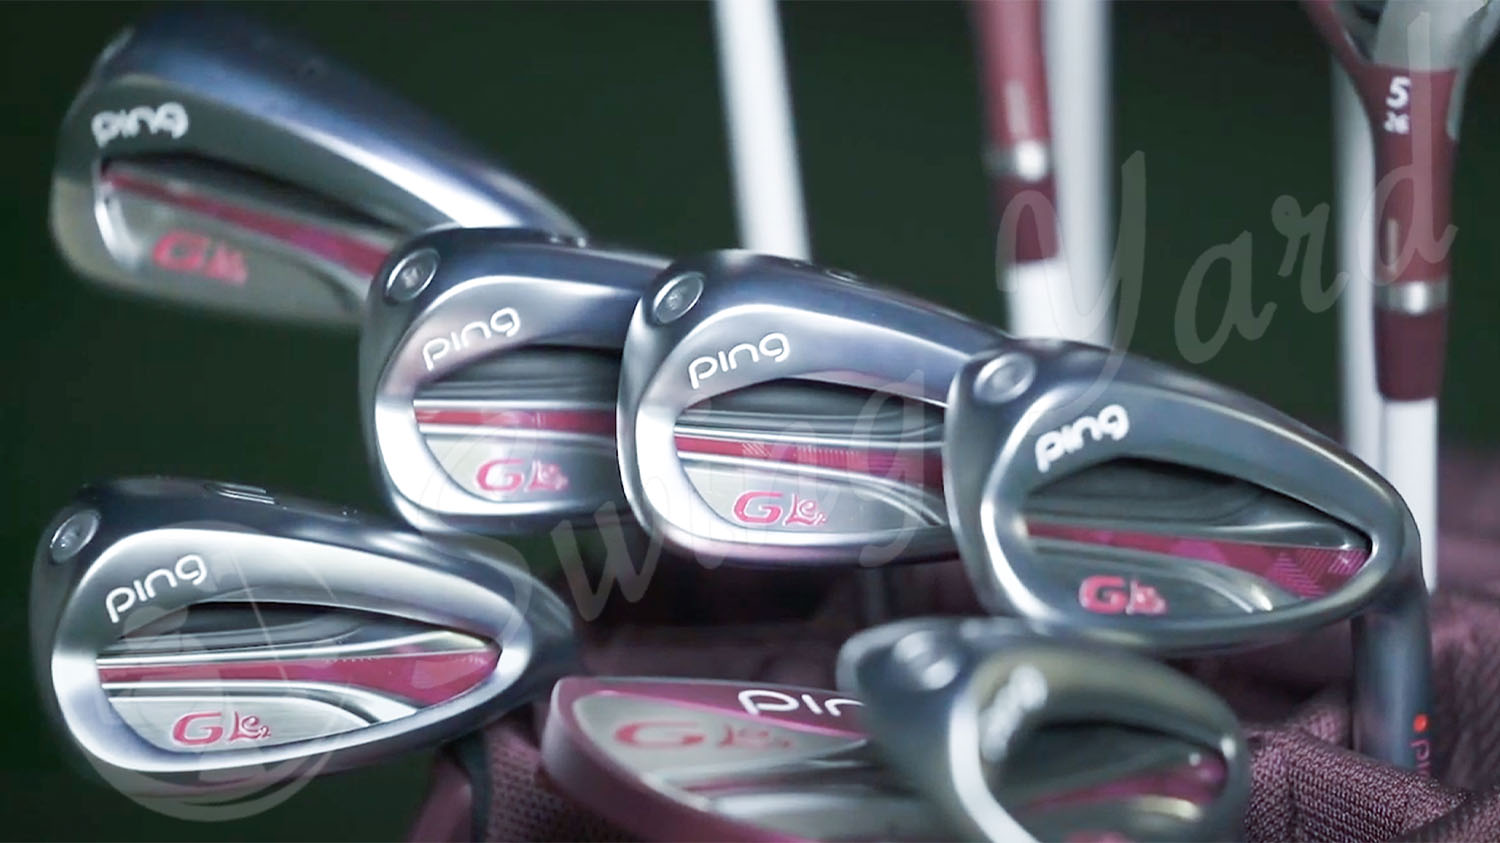 The best value golf clubs for Senior Ladies at the range